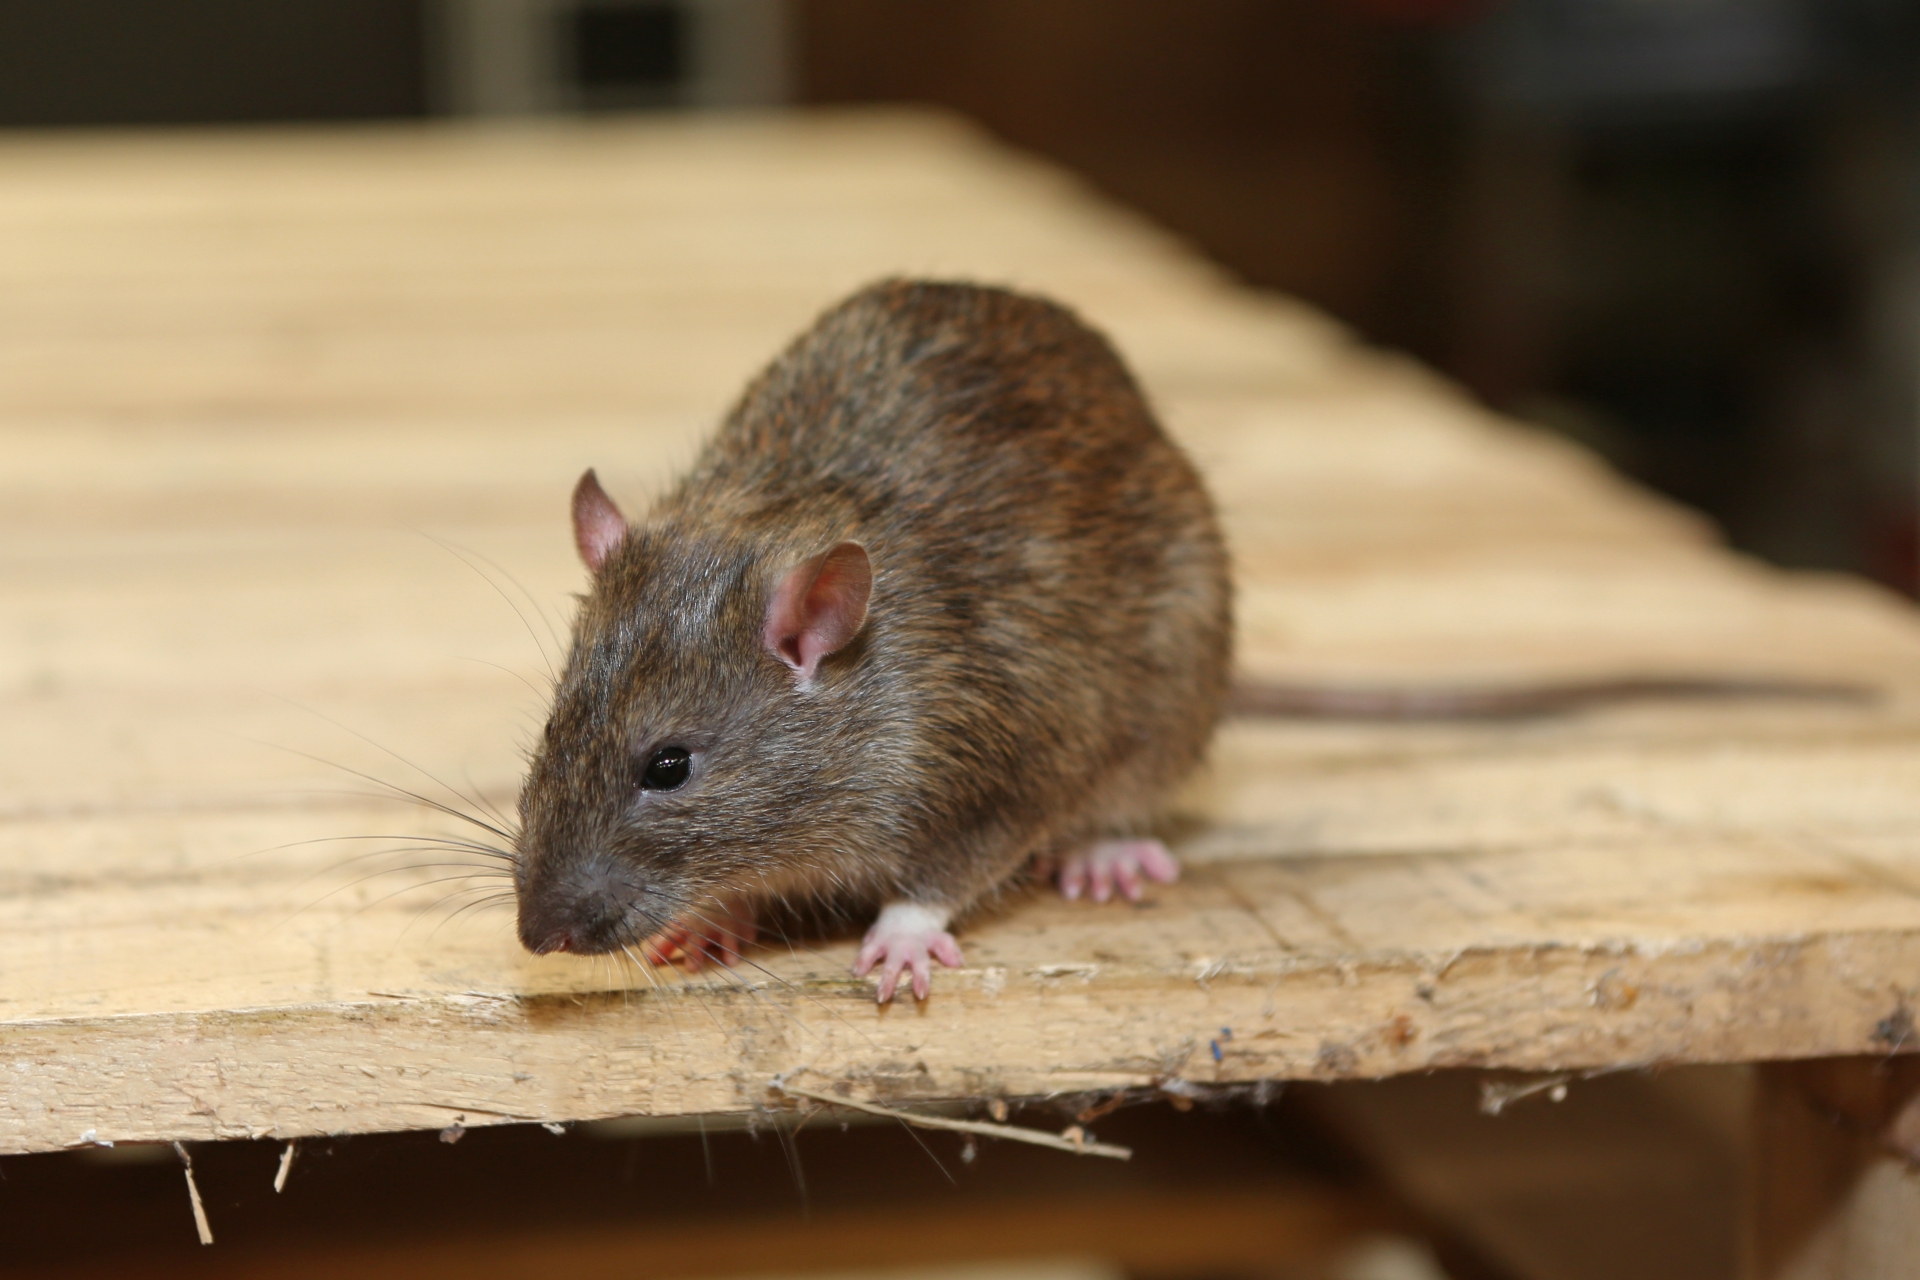 Rat Control, Pest Control in Rotherhithe, South Bermondsey, Surrey Docks, SE16. Call Now 020 8166 9746